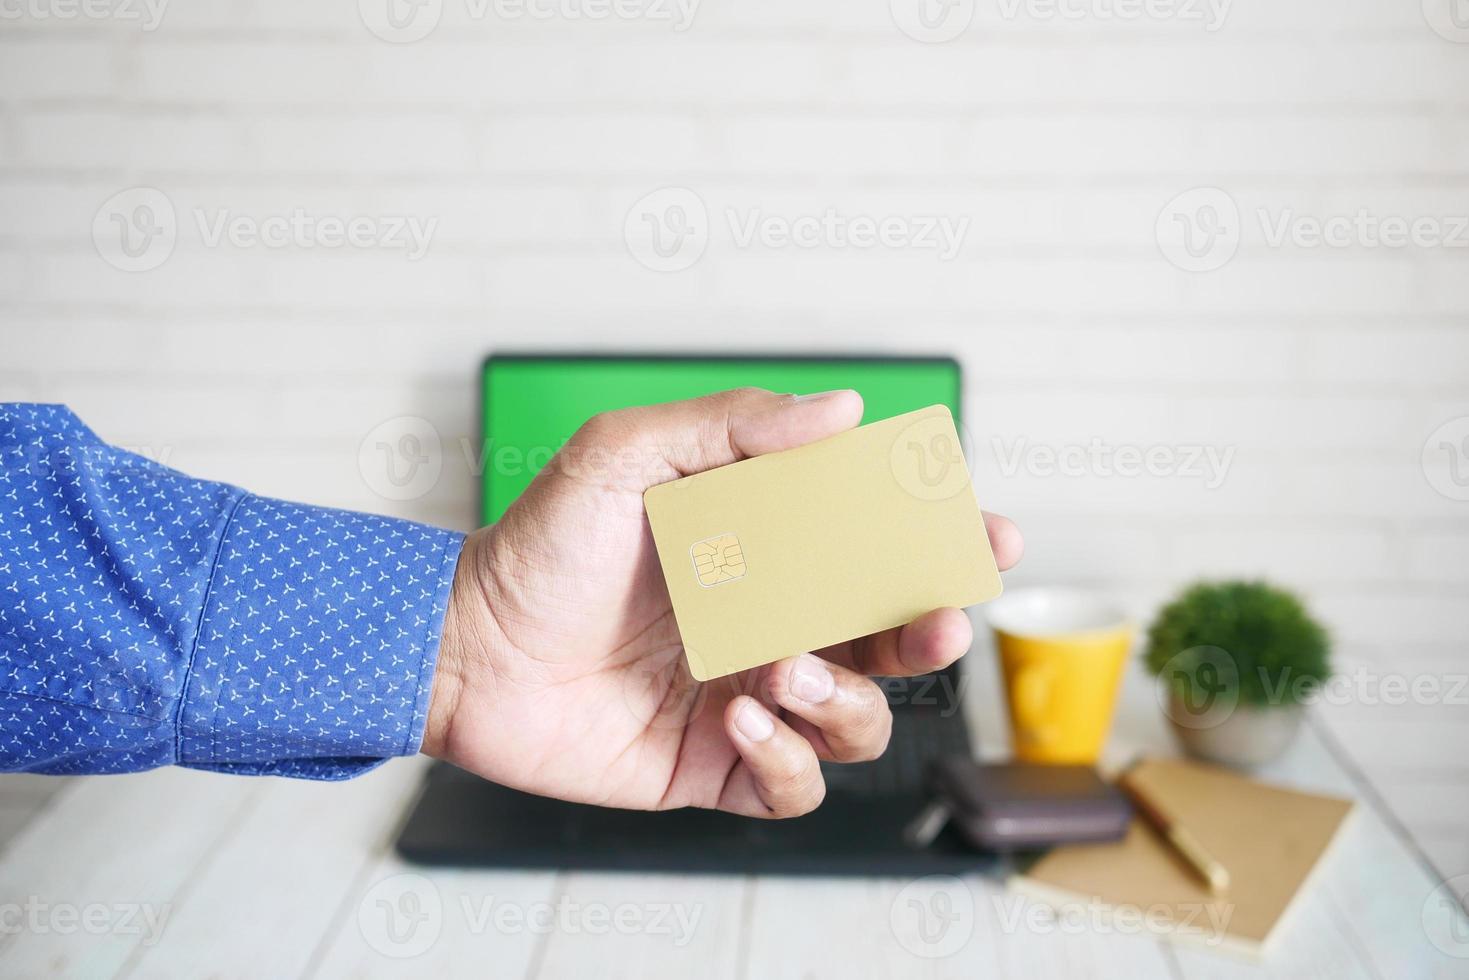 Man in casual dress showing credit card photo